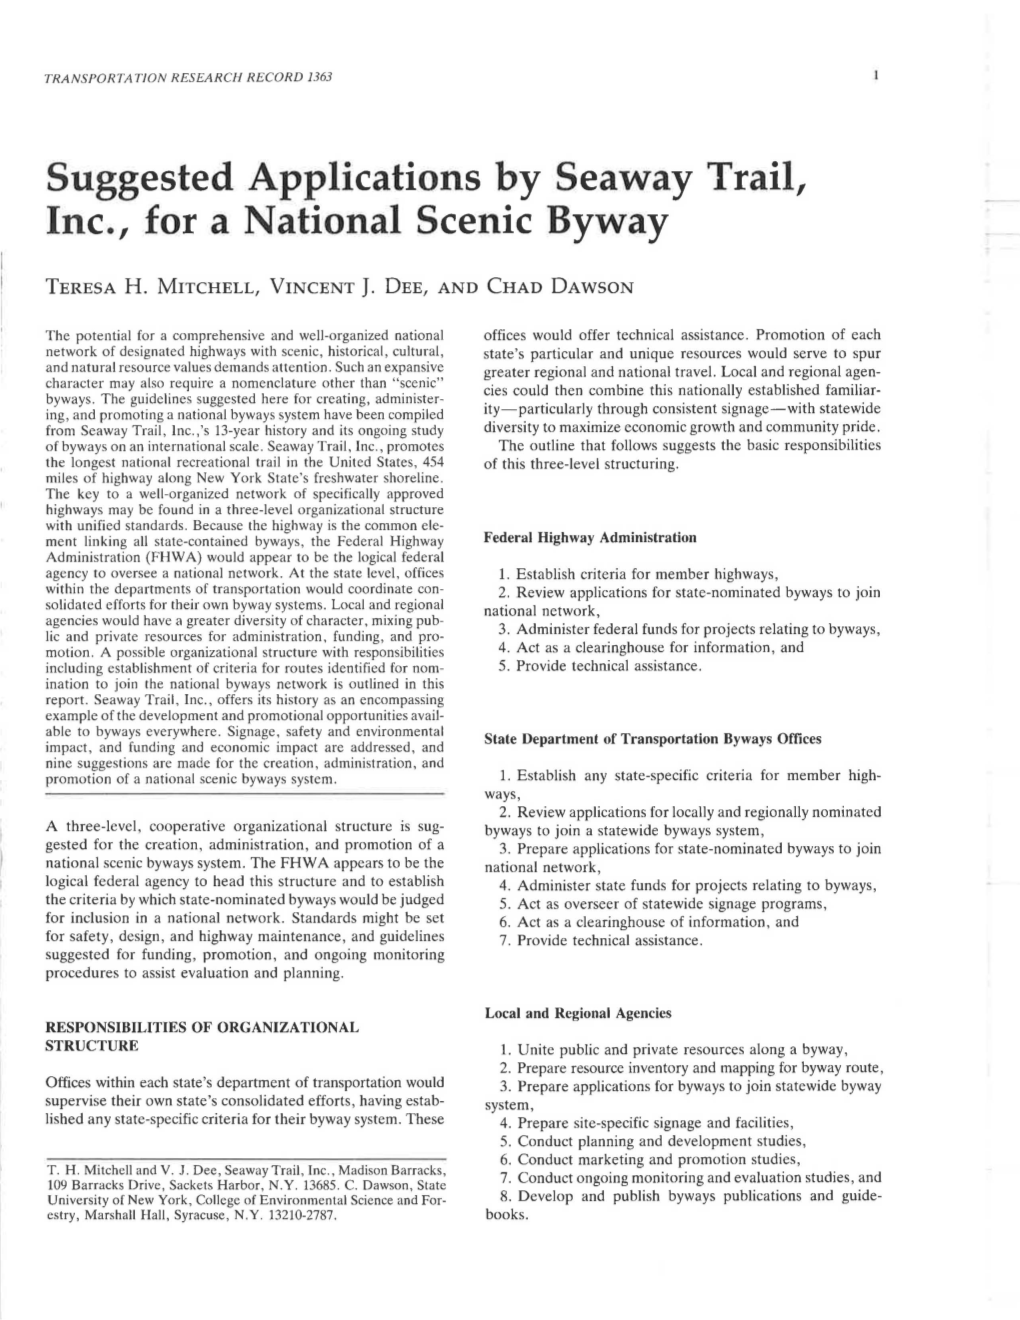 Suggested Applications by Seaway Trail, Inc., for a National Scenic Byway